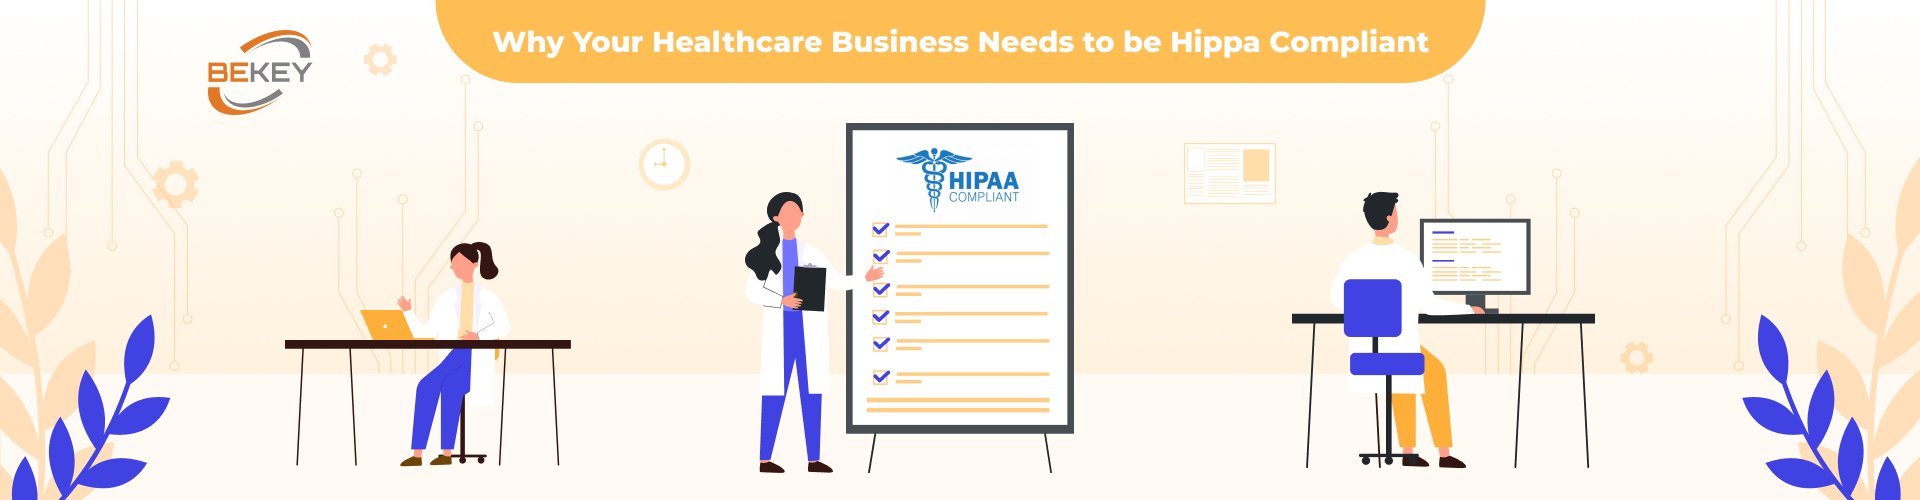 Why your healthcare business needs to be HIPAA compliant 